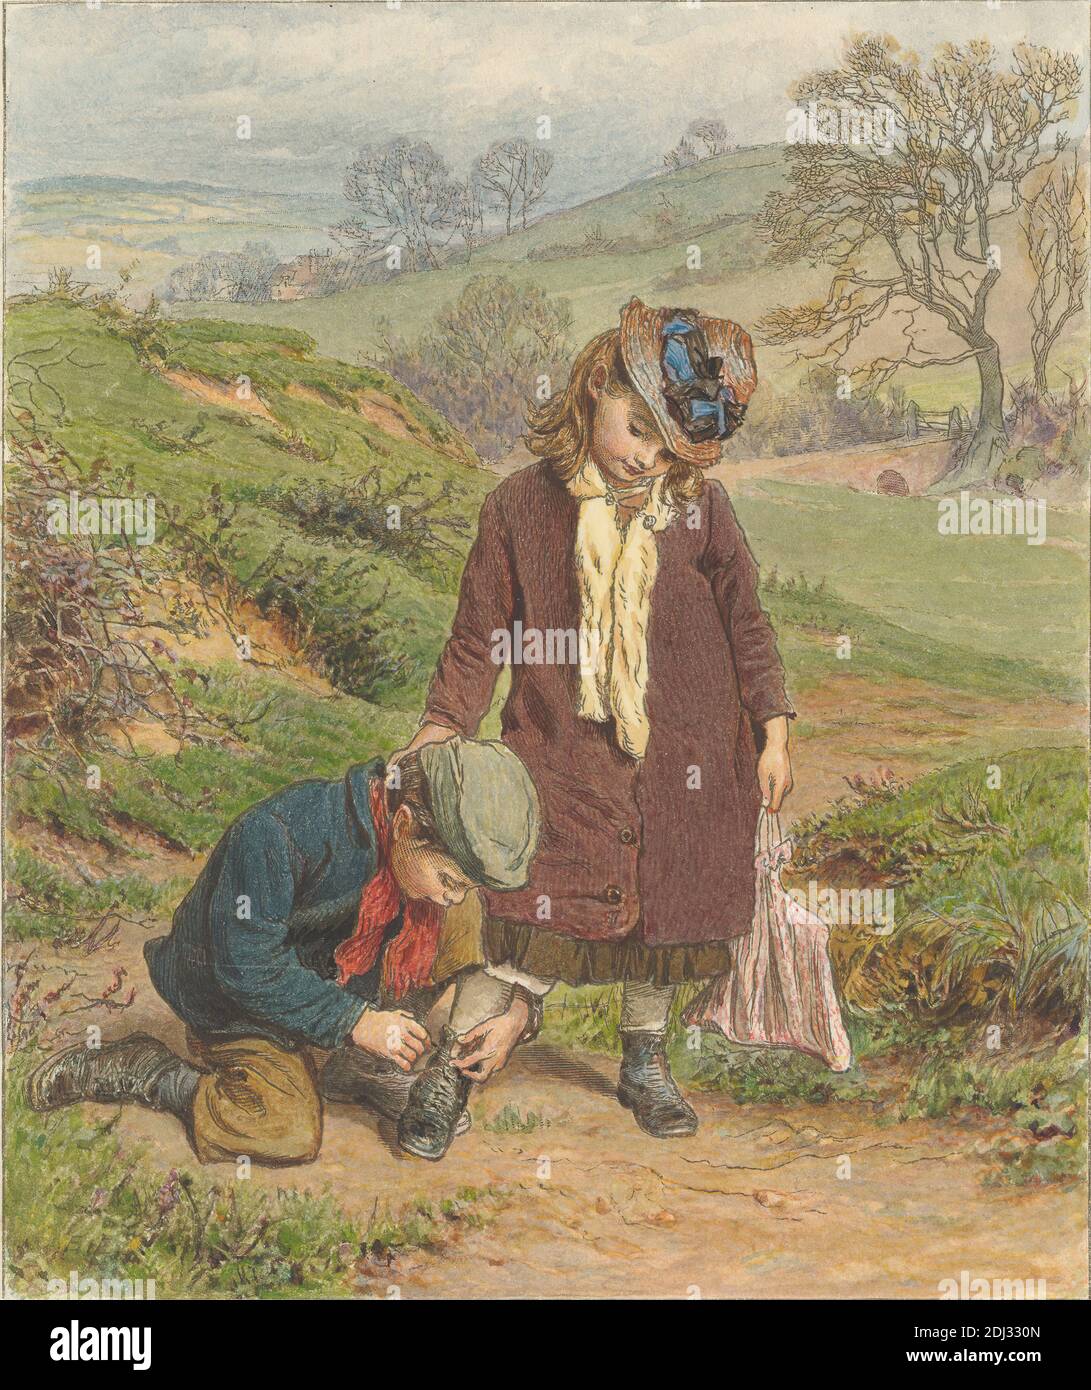 Boy Tying a Girl's Shoe, Print made by Robert Barnes, 1840–1895, British, after Robert Barnes, 1840–1895, British, undated, Wood-engraving with watercolor on moderately thick, slightly textured, cream wove paper mounted on moderately thick, slightly textured, beige wove paper, Mount: 8 3/4 x 7 7/8 inches (22.2 x 20 cm), Sheet: 8 7/16 x 7 1/16 inches (21.4 x 18 cm), and Image: 6 11/16 x 5 9/16 inches (17 x 14.2 cm), bag, bonnet, boy, breeches, bridge (built work), cap, children, coat, dress, flowers (plants), gate, genre subject, girl, grass, helping, hills, house, jackets, laces, landscape Stock Photo